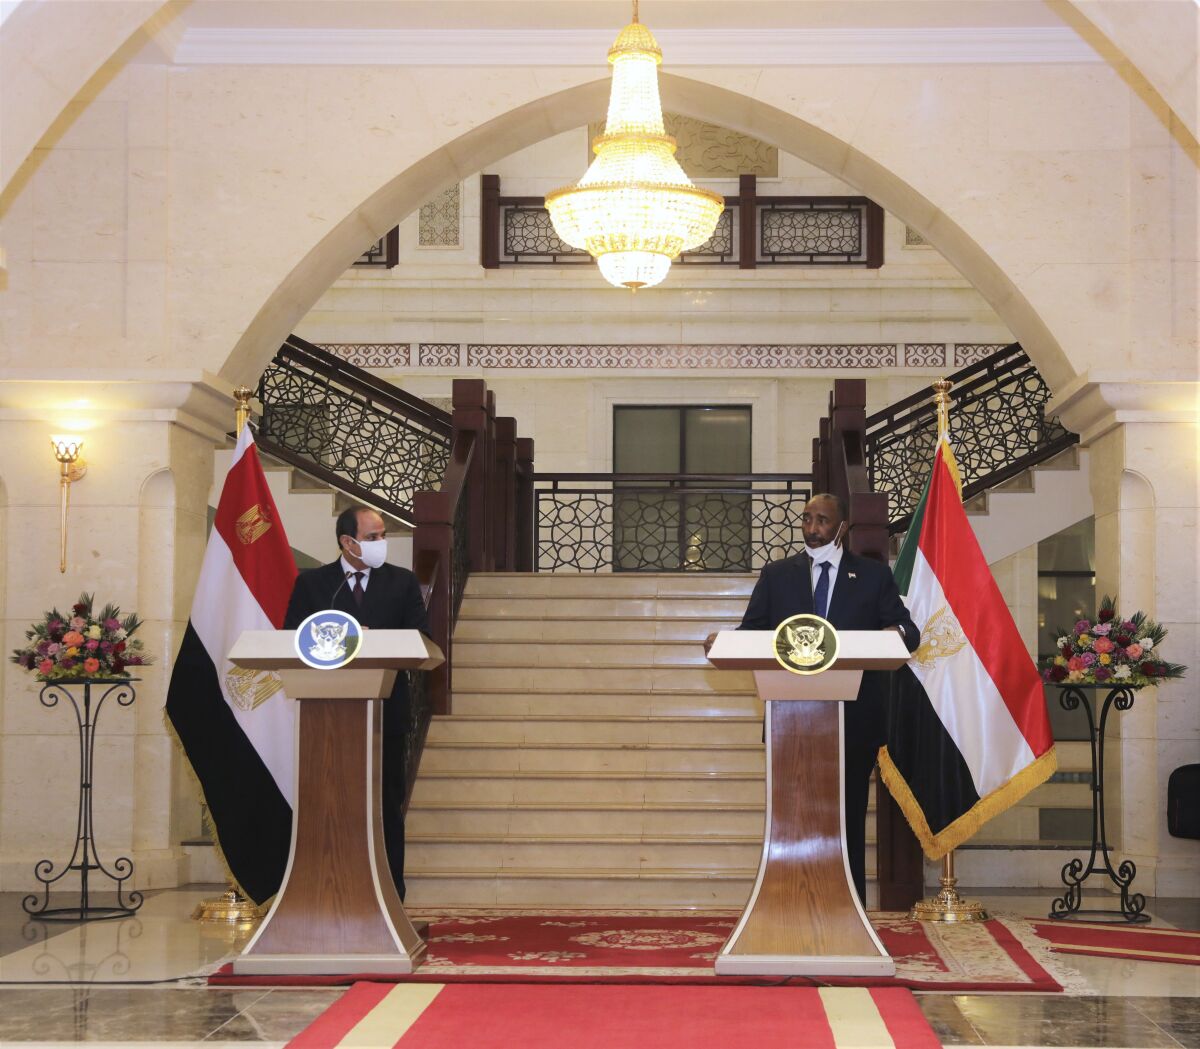 Egyptian President Abdel Fattah al-Sisi meets Chairman of the Sovereignty Council of Sudan Gen. Abdel Fattah Abdelrahman al-Burhan at the Presidential Palace in Khartoum, Sudan, Saturday, March. 6, 2021. Egypt's presidency says President Abdel Fattah el-Sissi trip was to address an array of issues, including economic and military ties and the two nations’ dispute with Ethiopia over a massive dam Addis Ababa is building on the Blue Nile. The visit comes amid a rapprochement between the two governments. (Presidency of Sudan via AP)